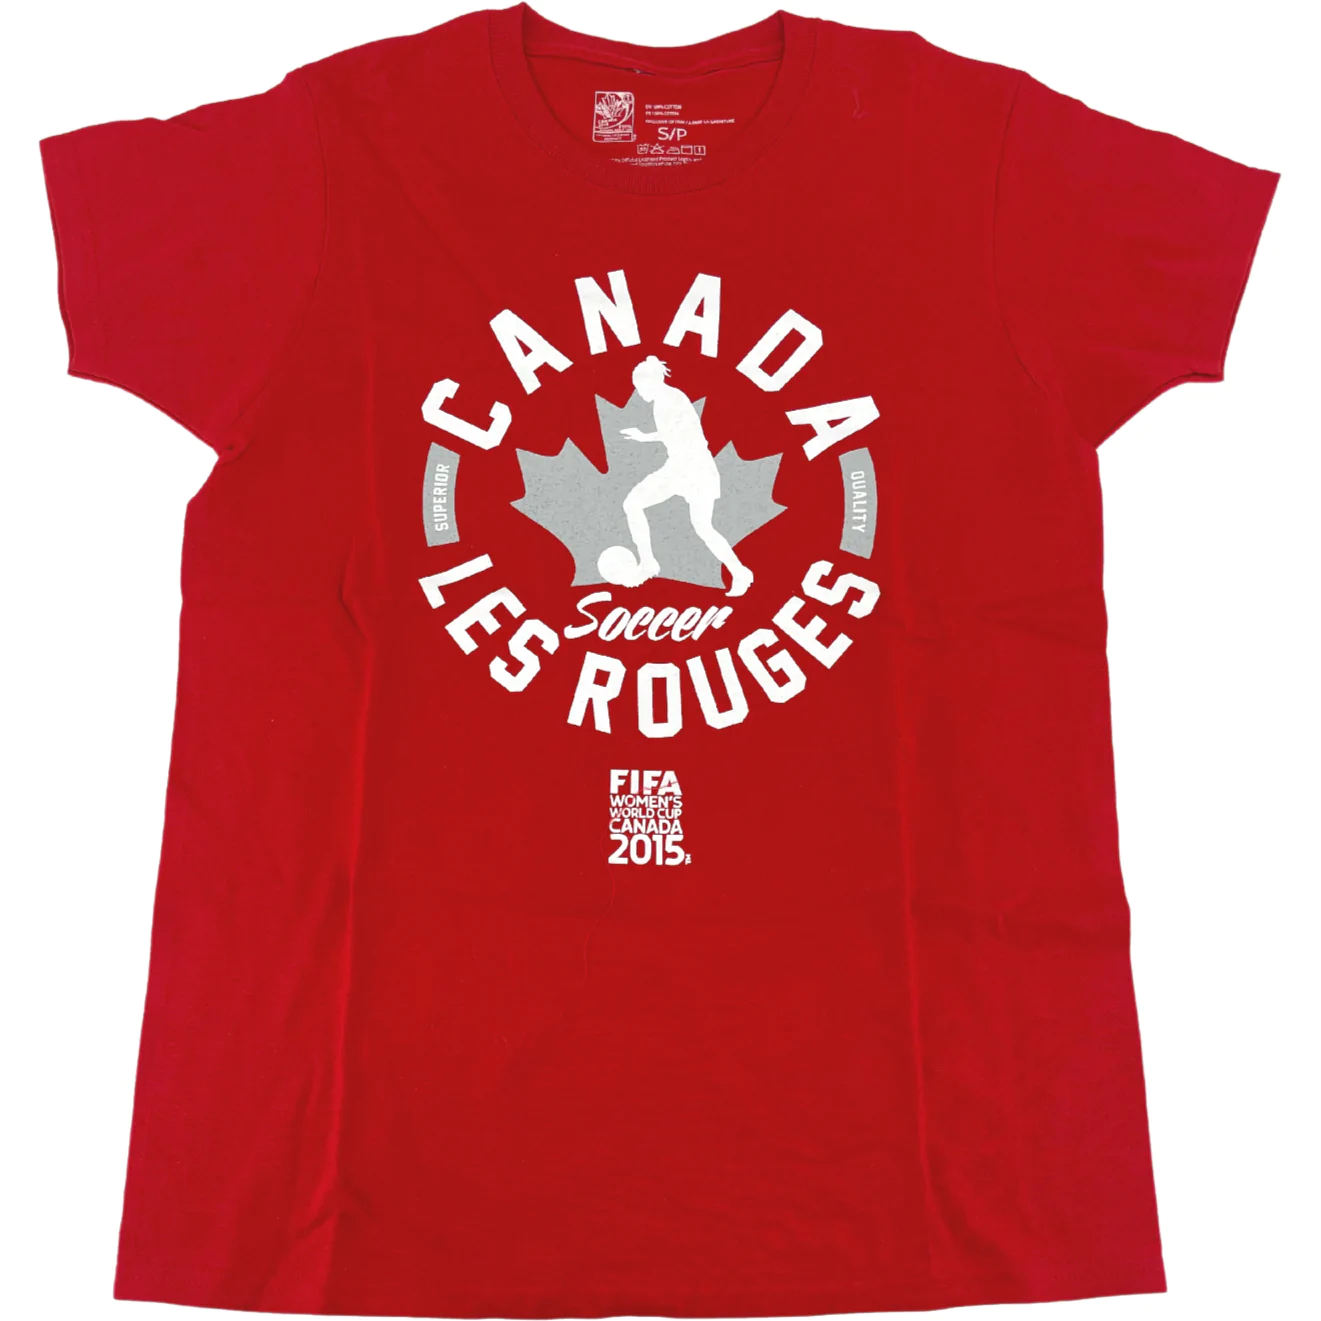 Fifa Women's World Cup T-Shirt / Team Canada / Red & White / Size Small